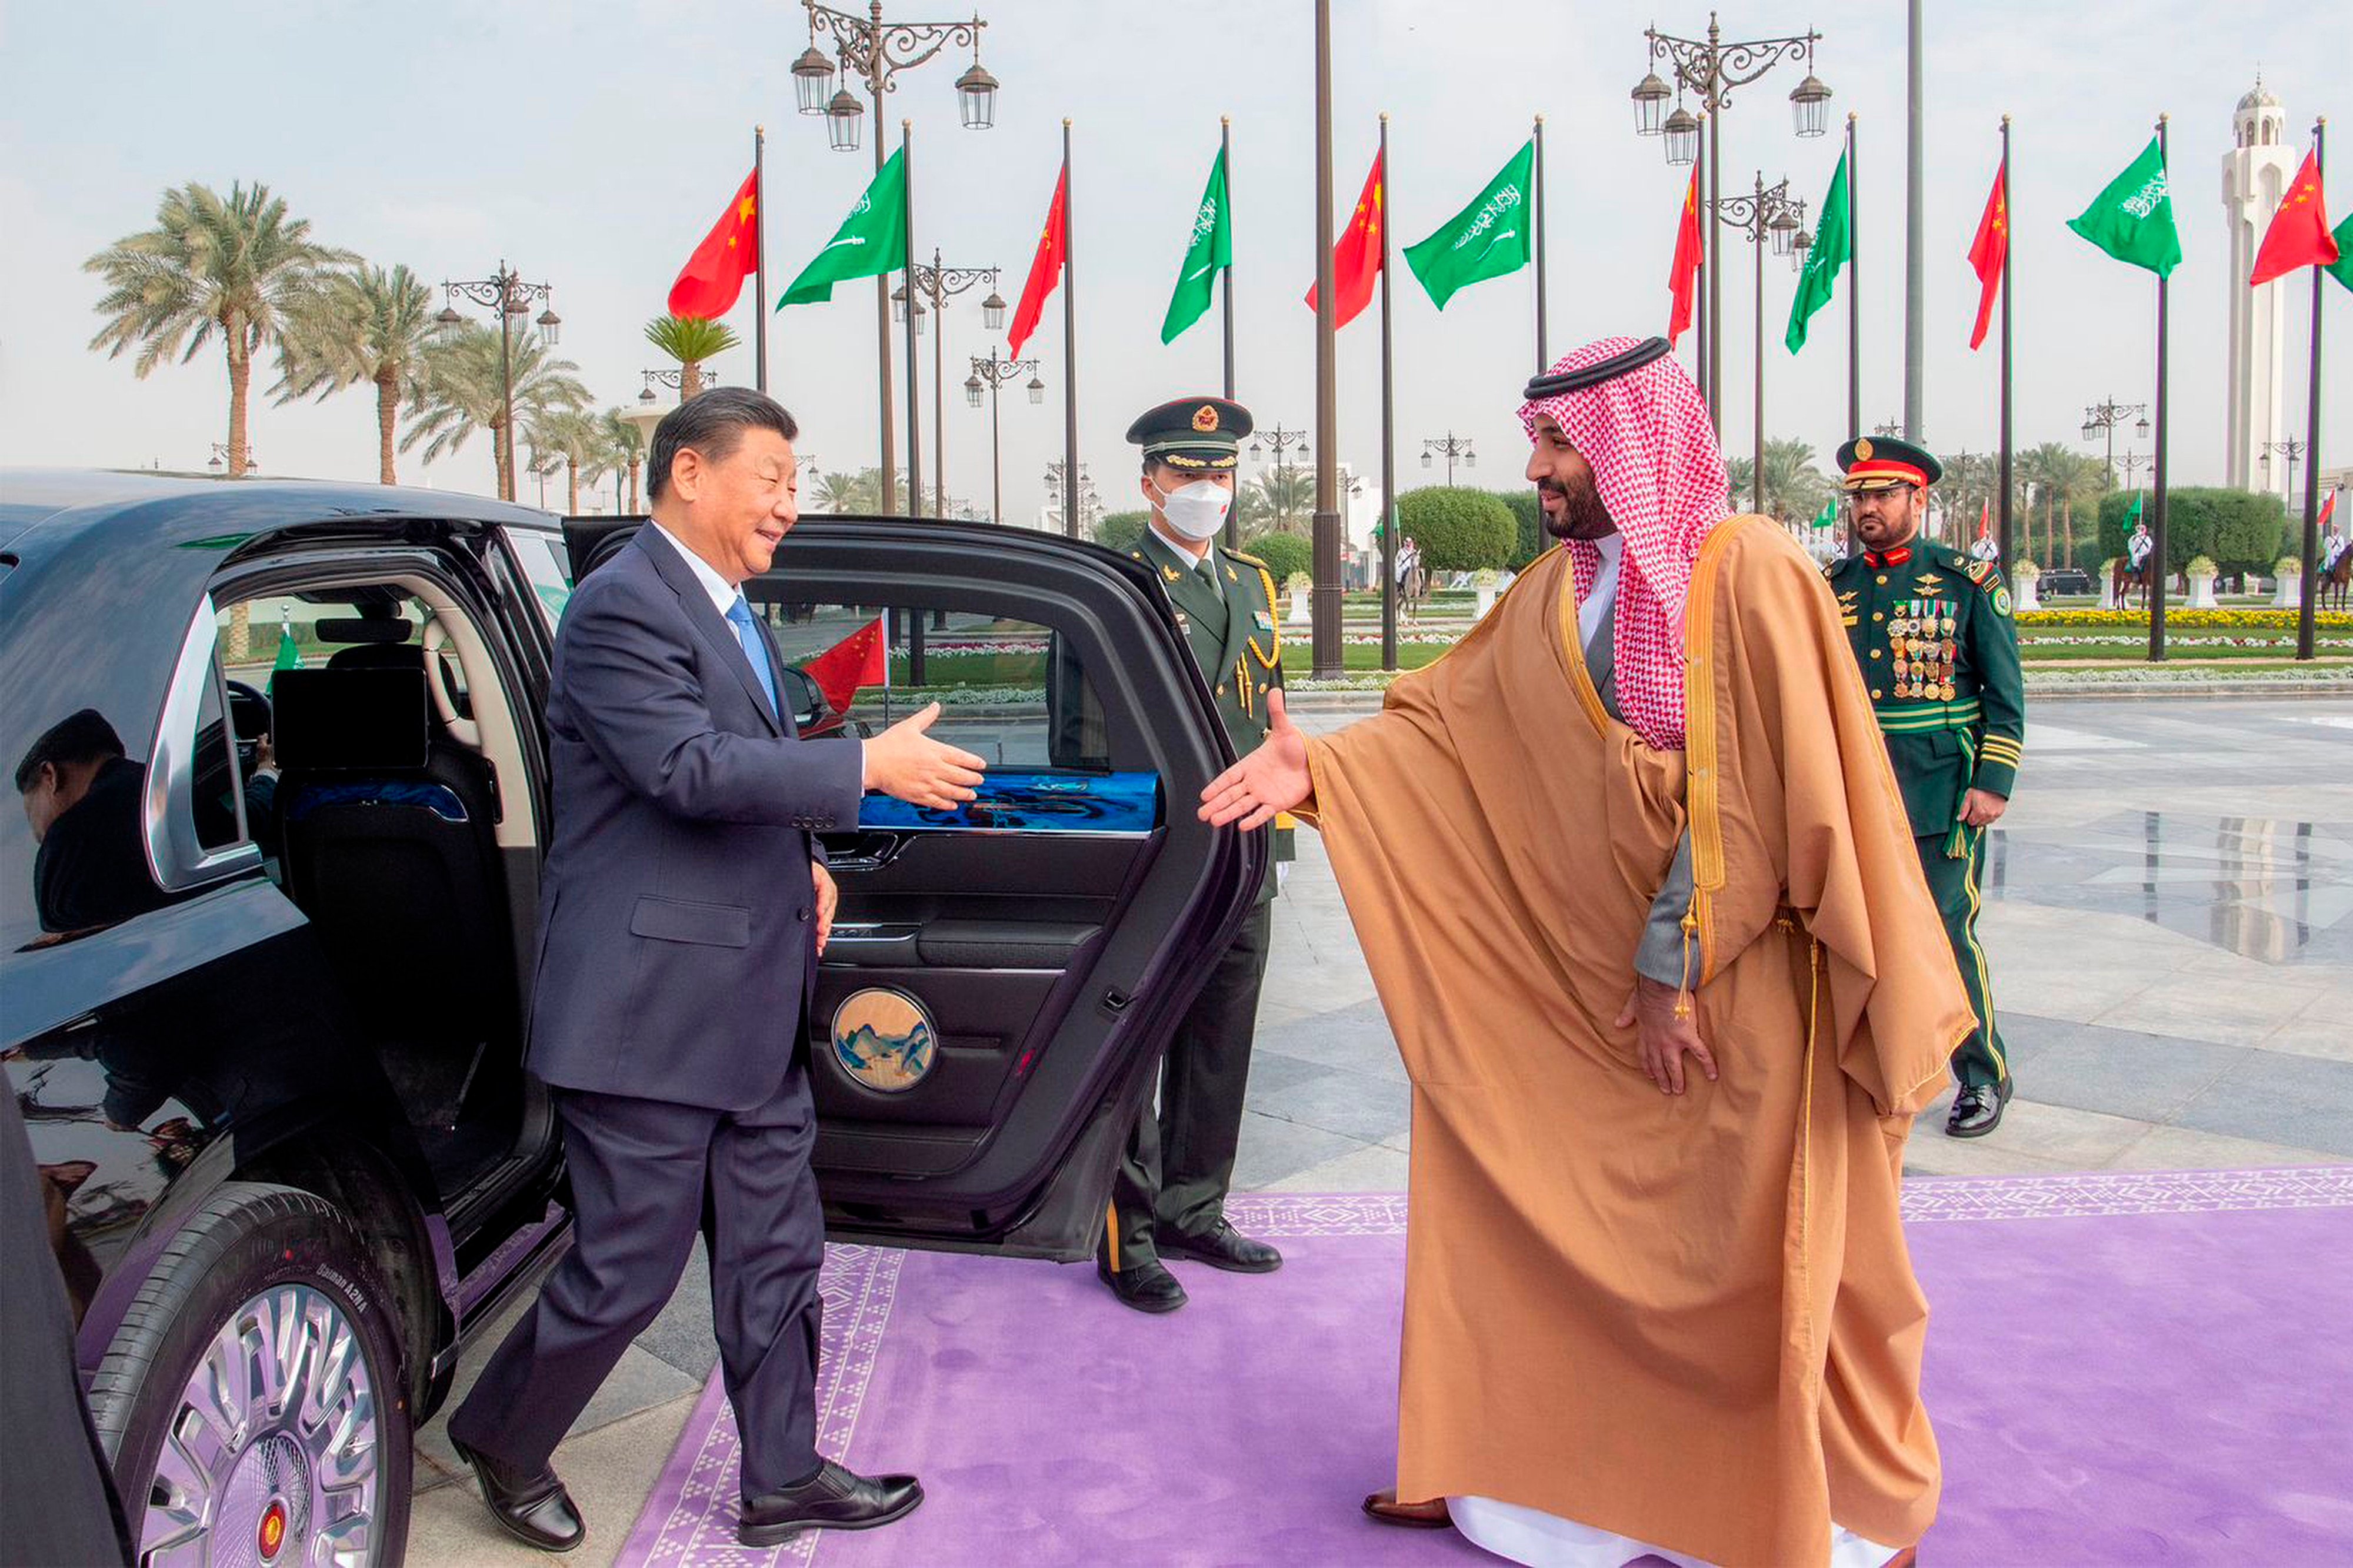 Chinese President Xi Jinping is welcomed by Saudi Crown Prince and Prime Minister Mohammed bin Salman on arrival at Al Yamama Palace in Riyadh, Saudi Arabia, on December 8, 2022. China-Saudi ties have deepened further since the meeting. Photo: Saudi Press Agency via AP